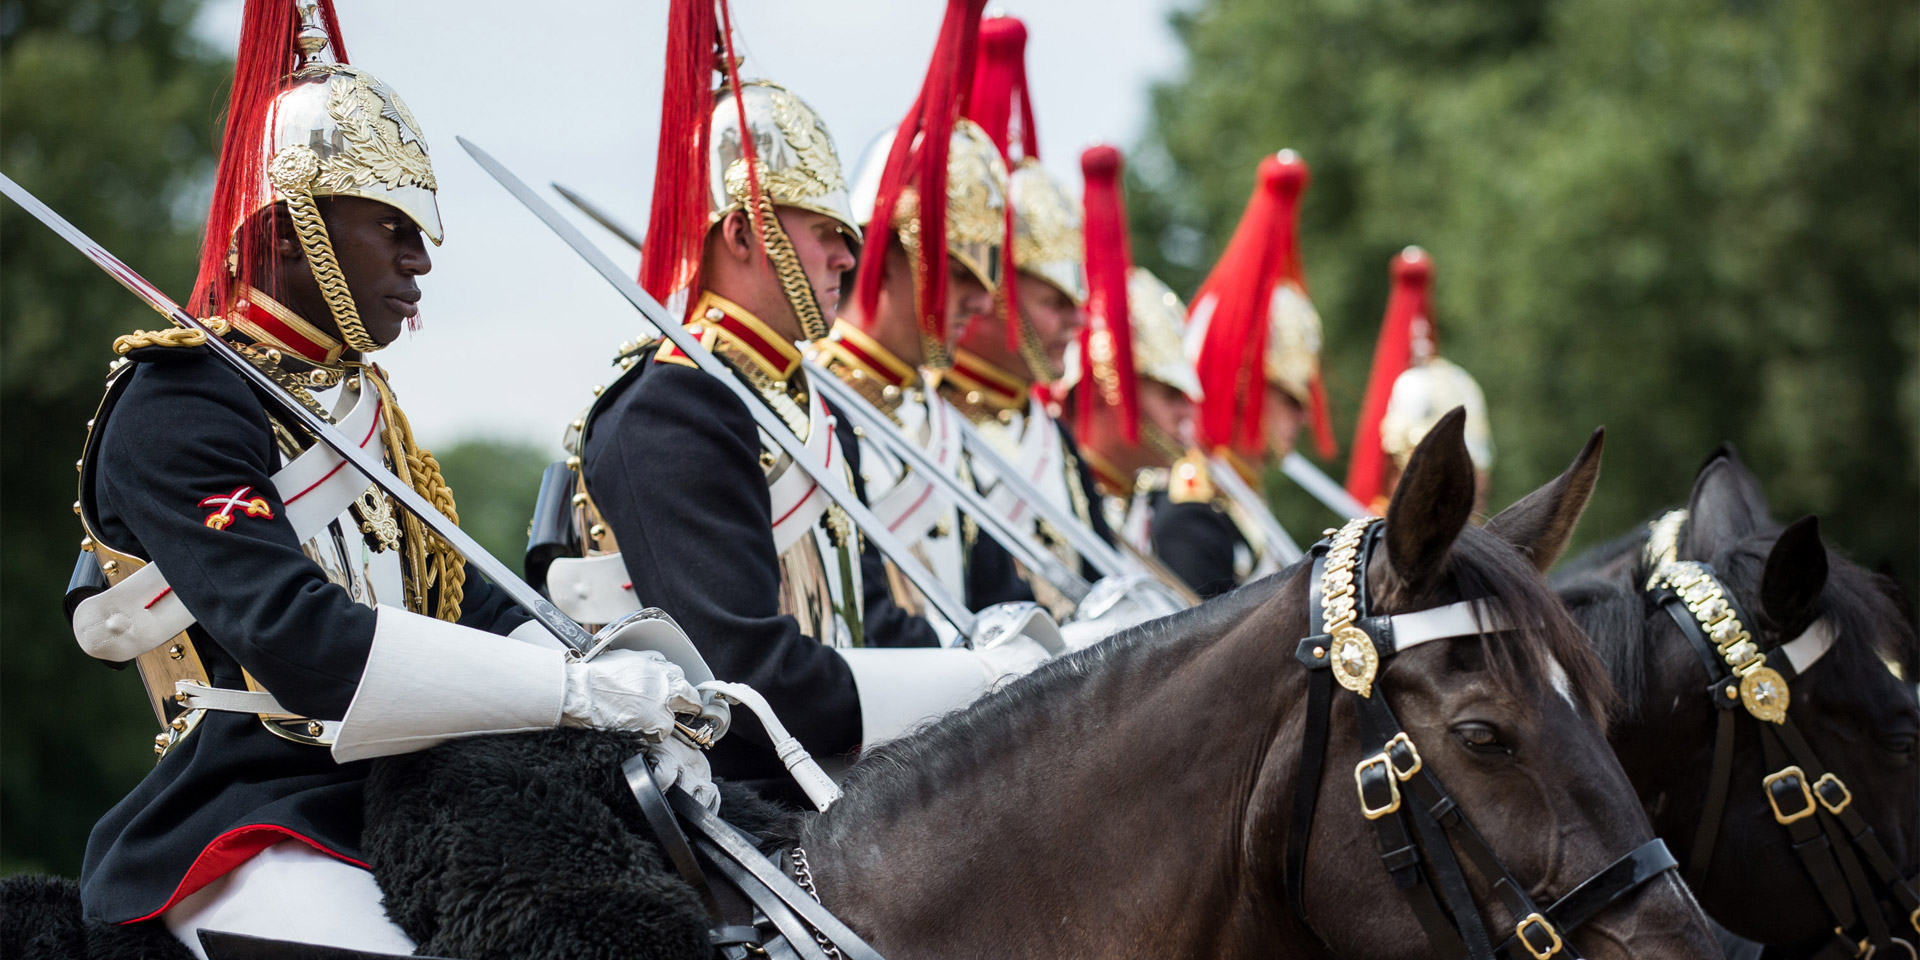 Household Cavalry Mounted Regiment, Horse Guards, London, 2016